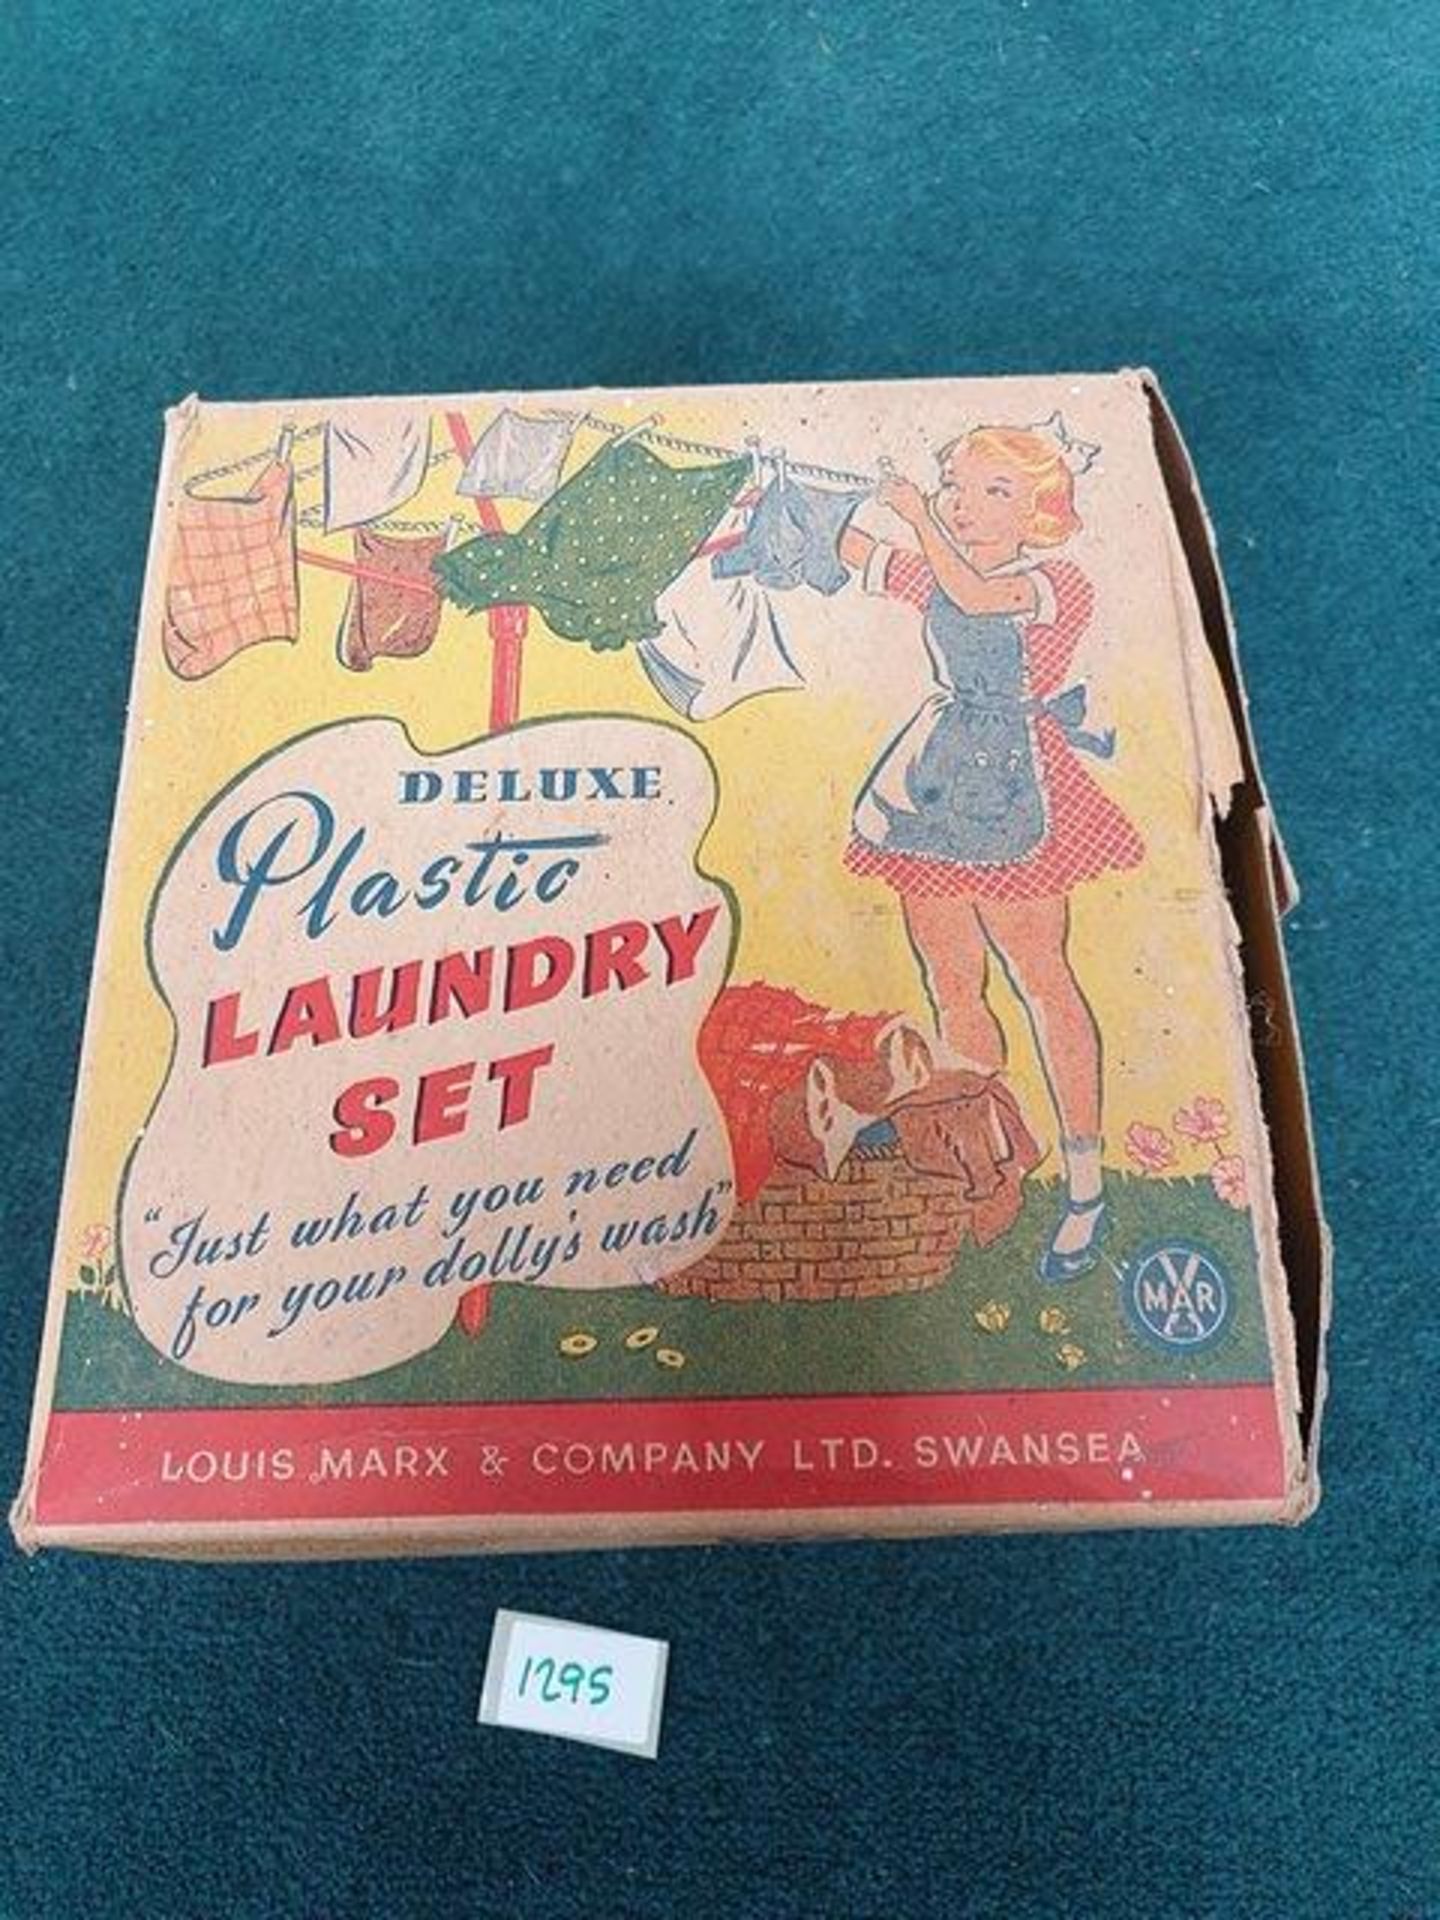 Marx Deluxe Plastic Laundry Set Complete With Box - Image 2 of 2